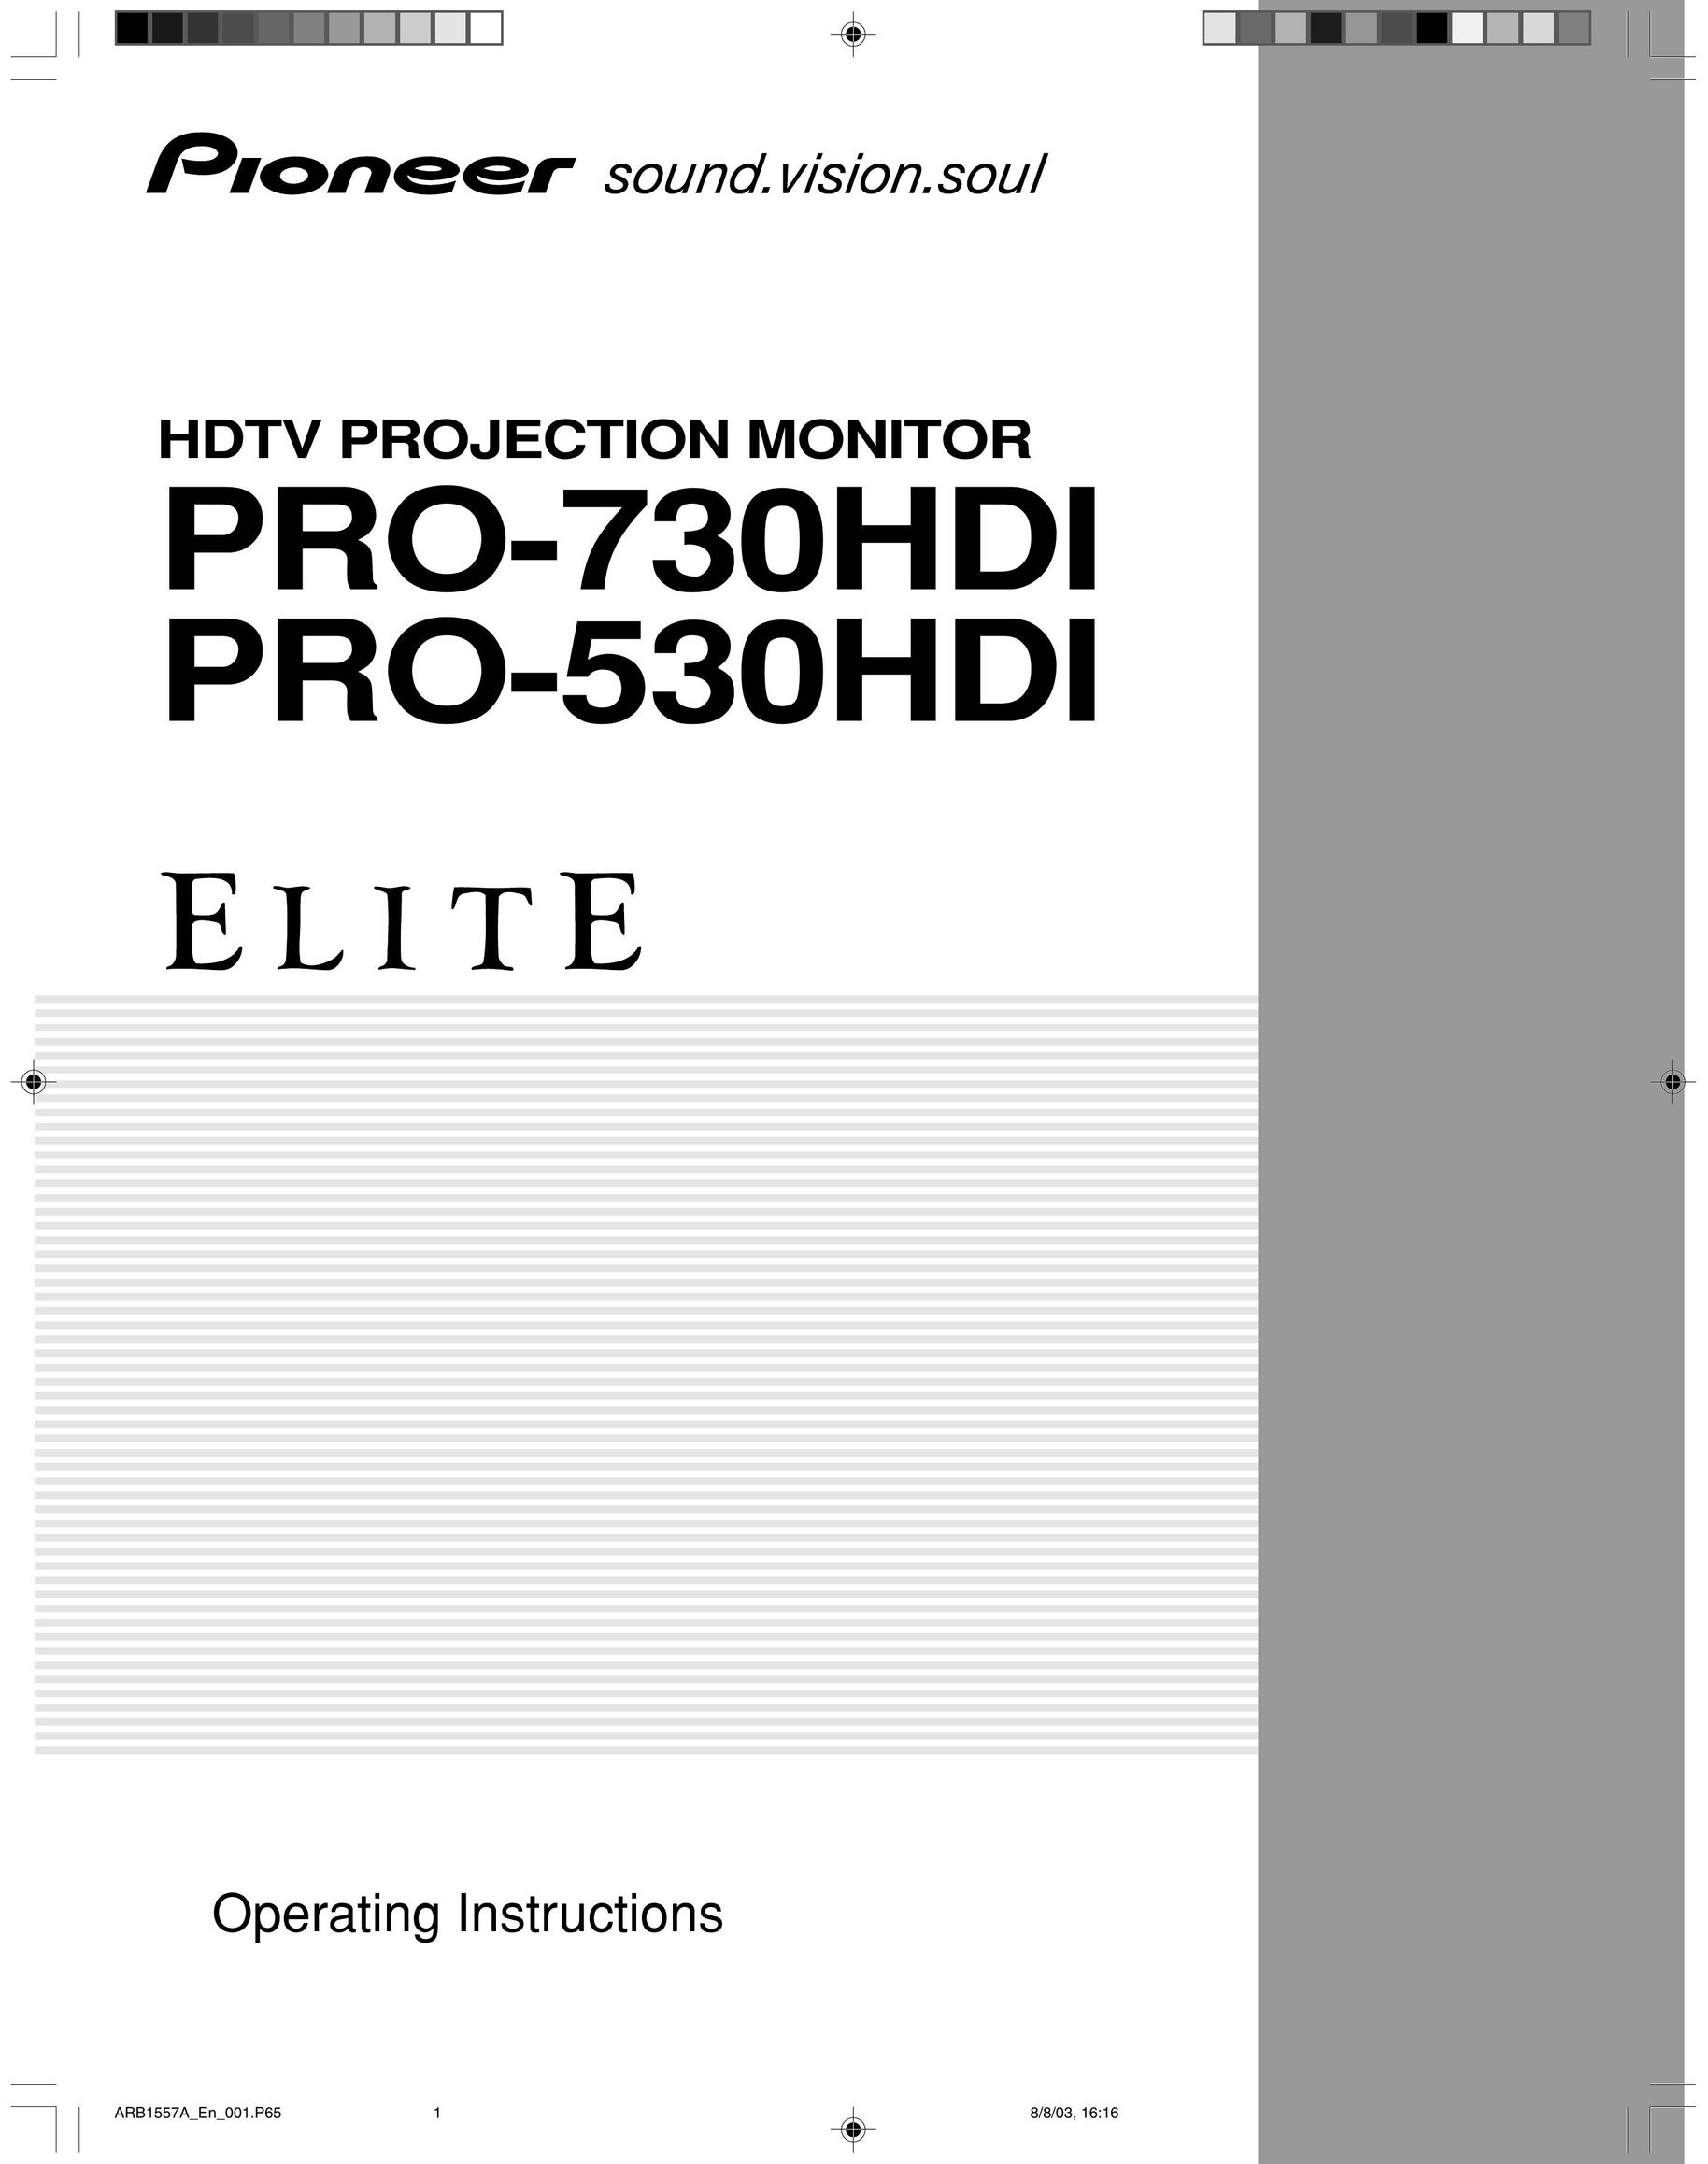 Pioneer PRO-730HDI Projection Television User Manual